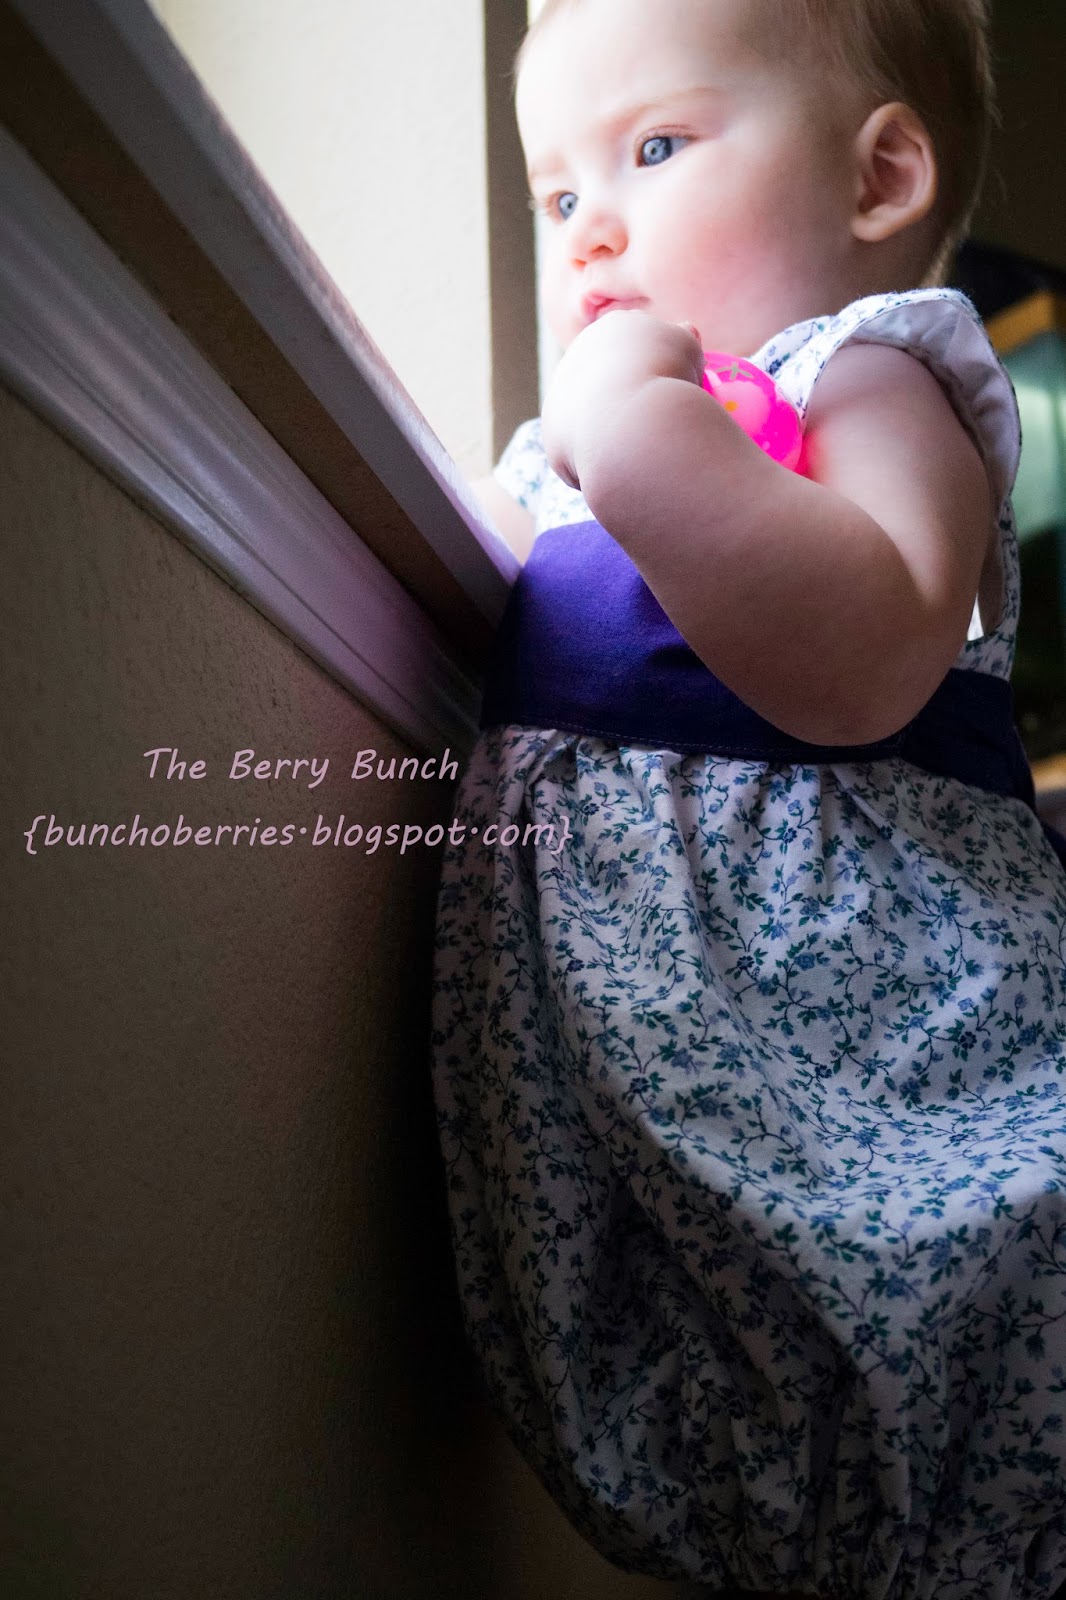 The Berry Bunch: Kenzie's Party Dress - Blog tour 2/14-2/21 {EYMM Patterns}